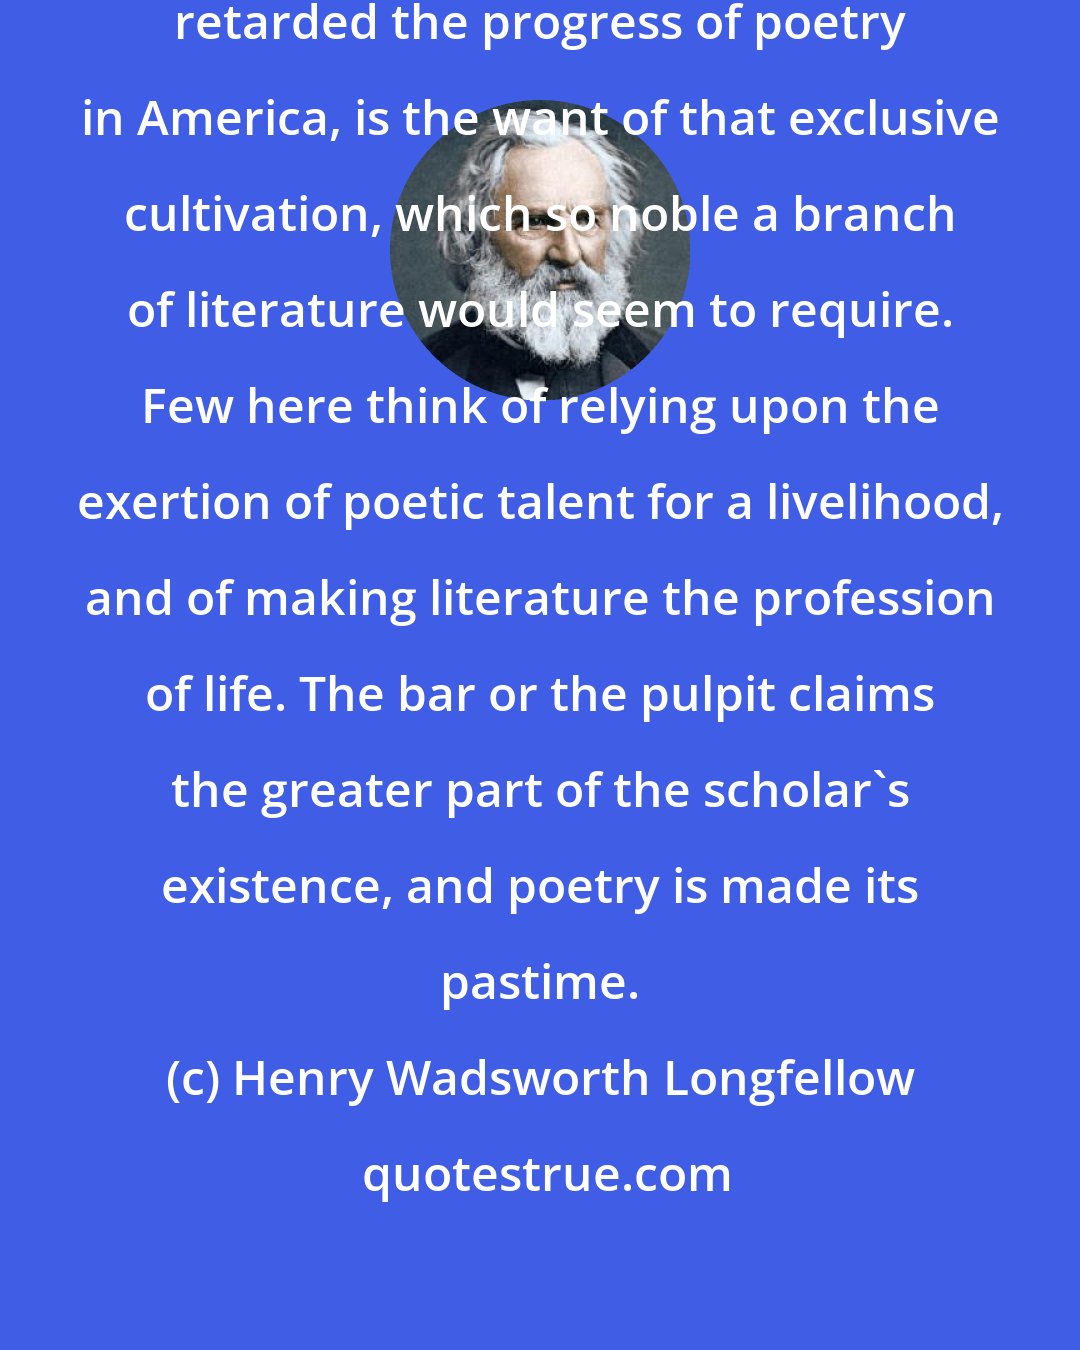 Henry Wadsworth Longfellow: Perhaps the chief cause which has retarded the progress of poetry in America, is the want of that exclusive cultivation, which so noble a branch of literature would seem to require. Few here think of relying upon the exertion of poetic talent for a livelihood, and of making literature the profession of life. The bar or the pulpit claims the greater part of the scholar's existence, and poetry is made its pastime.